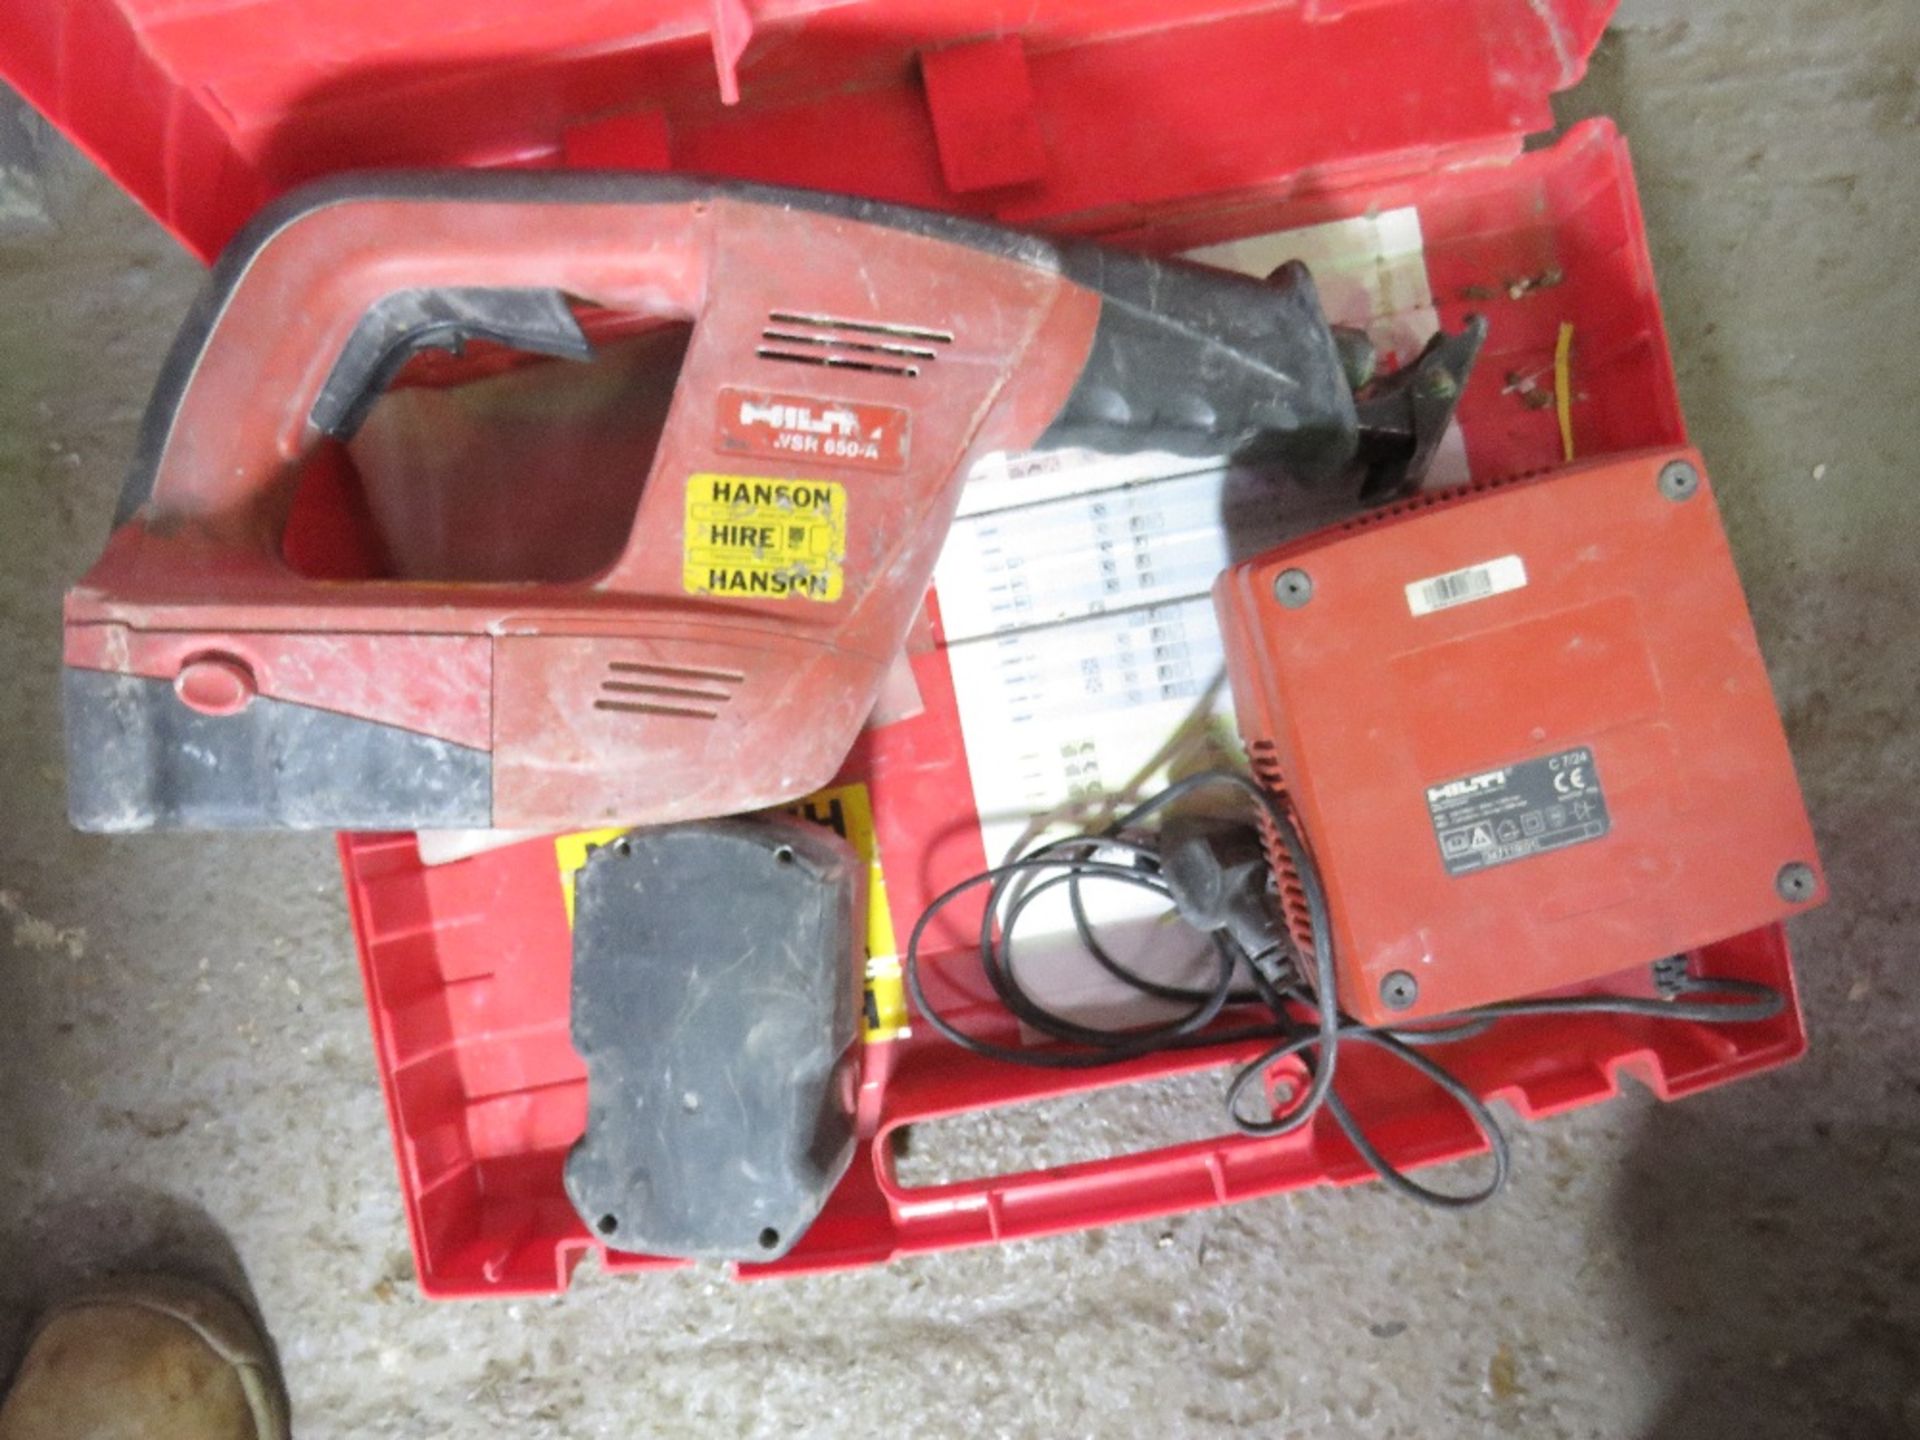 HILTI BATTERY RECIPROCATING SAW. UNTESTED, CONDITION UNKNOWN.